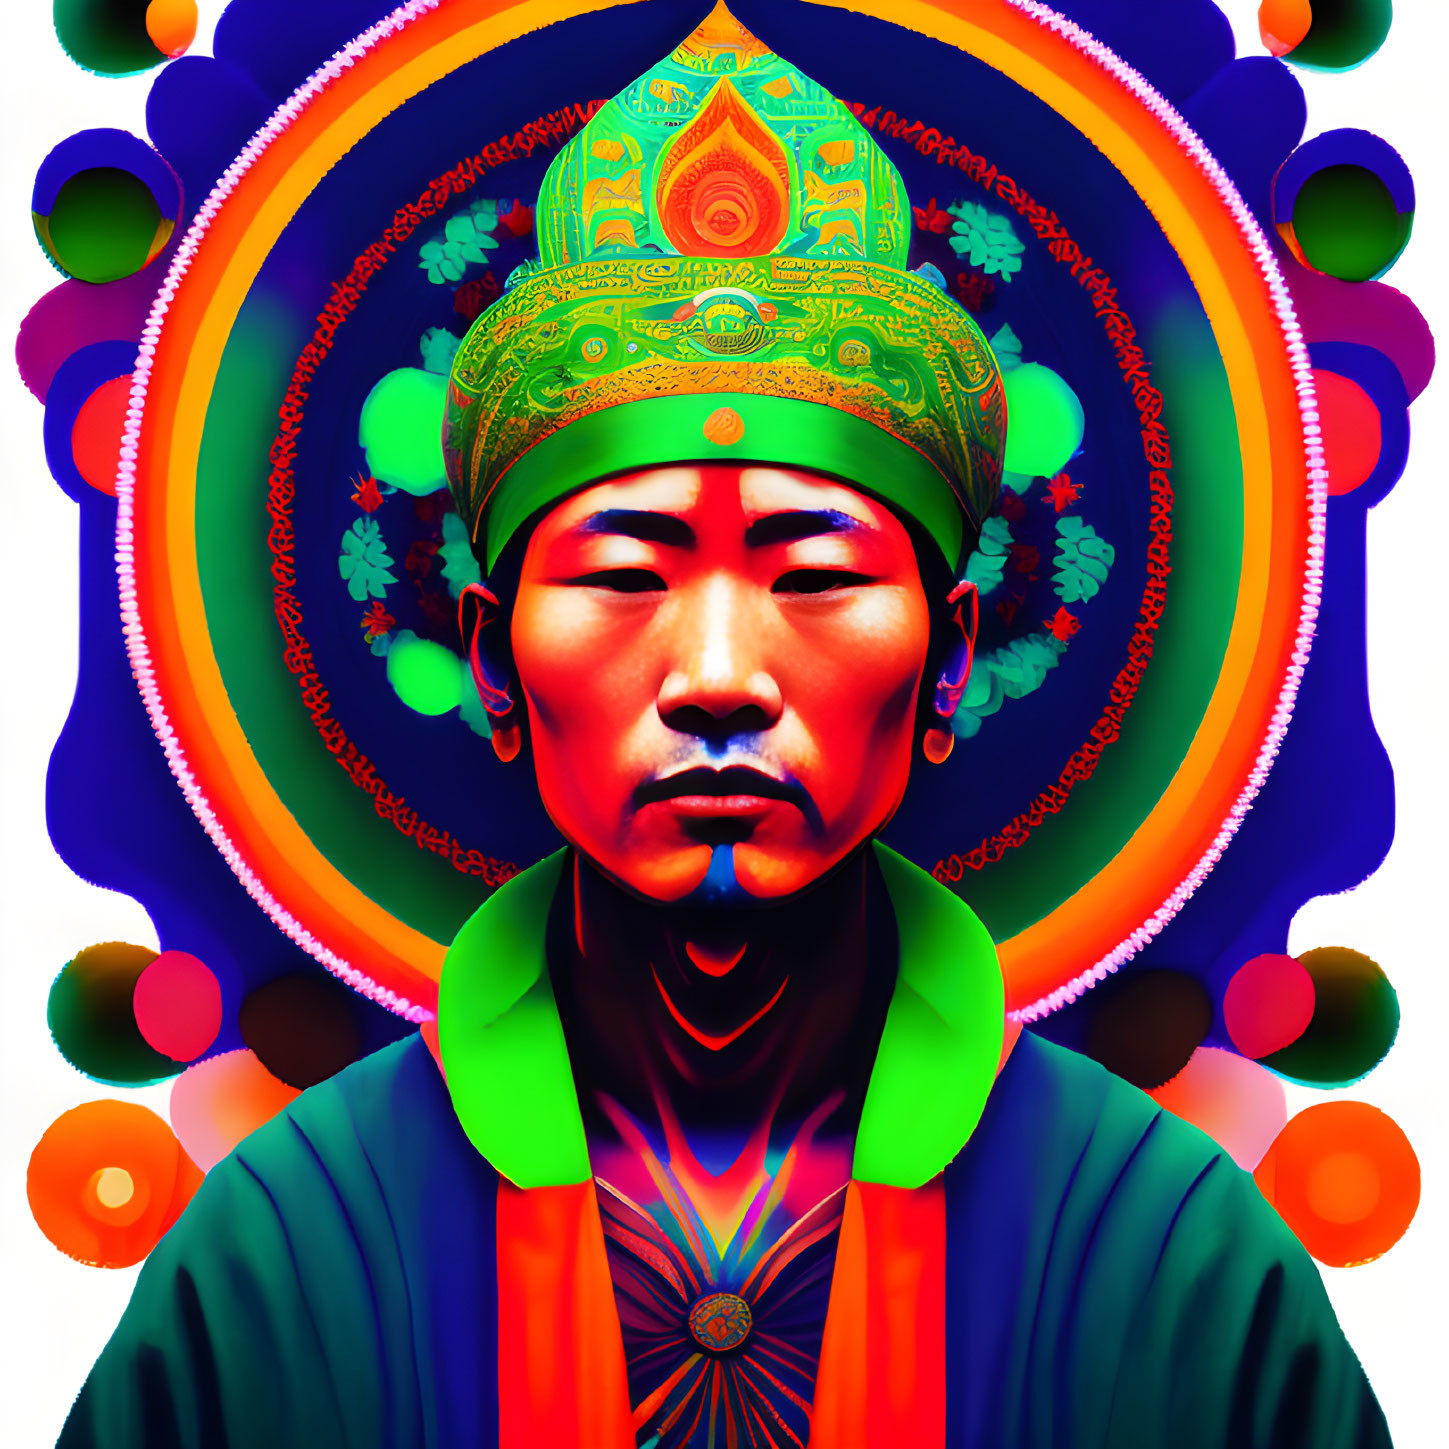 Symmetrical Asian face in colorful digital art with kaleidoscopic background